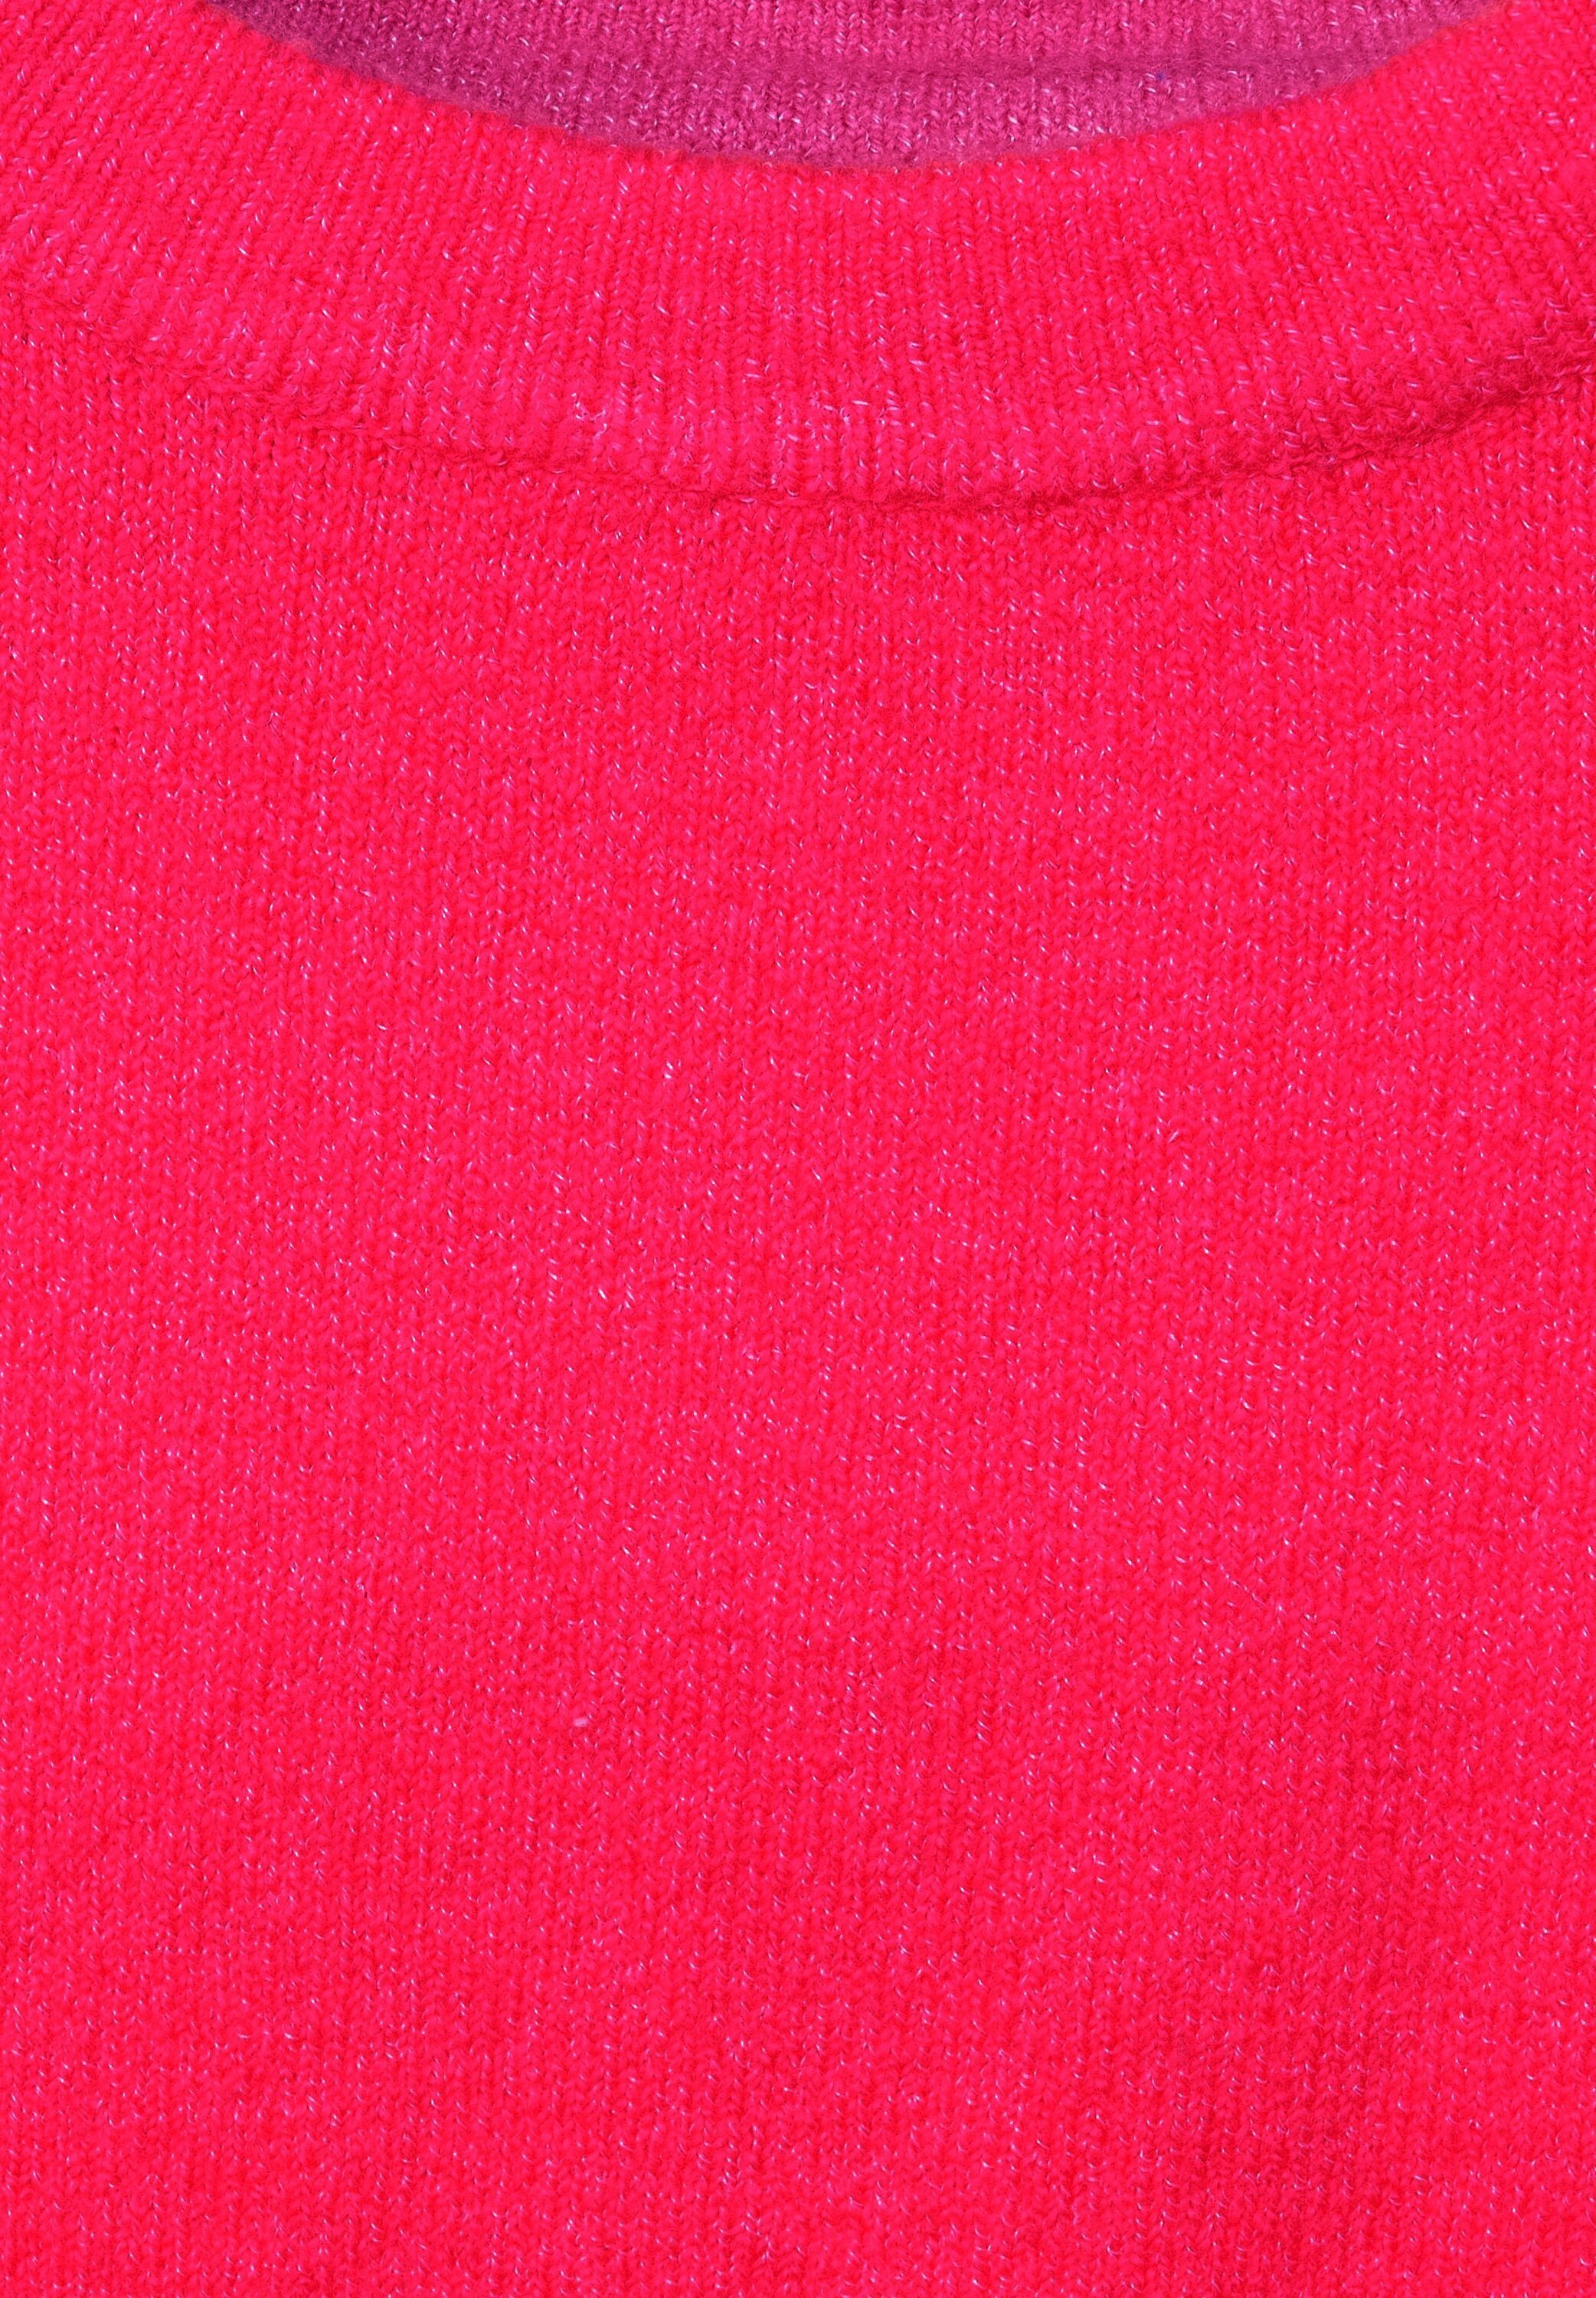 mit STREET showy Pullover coral ONE Strickpullover Farbdetails